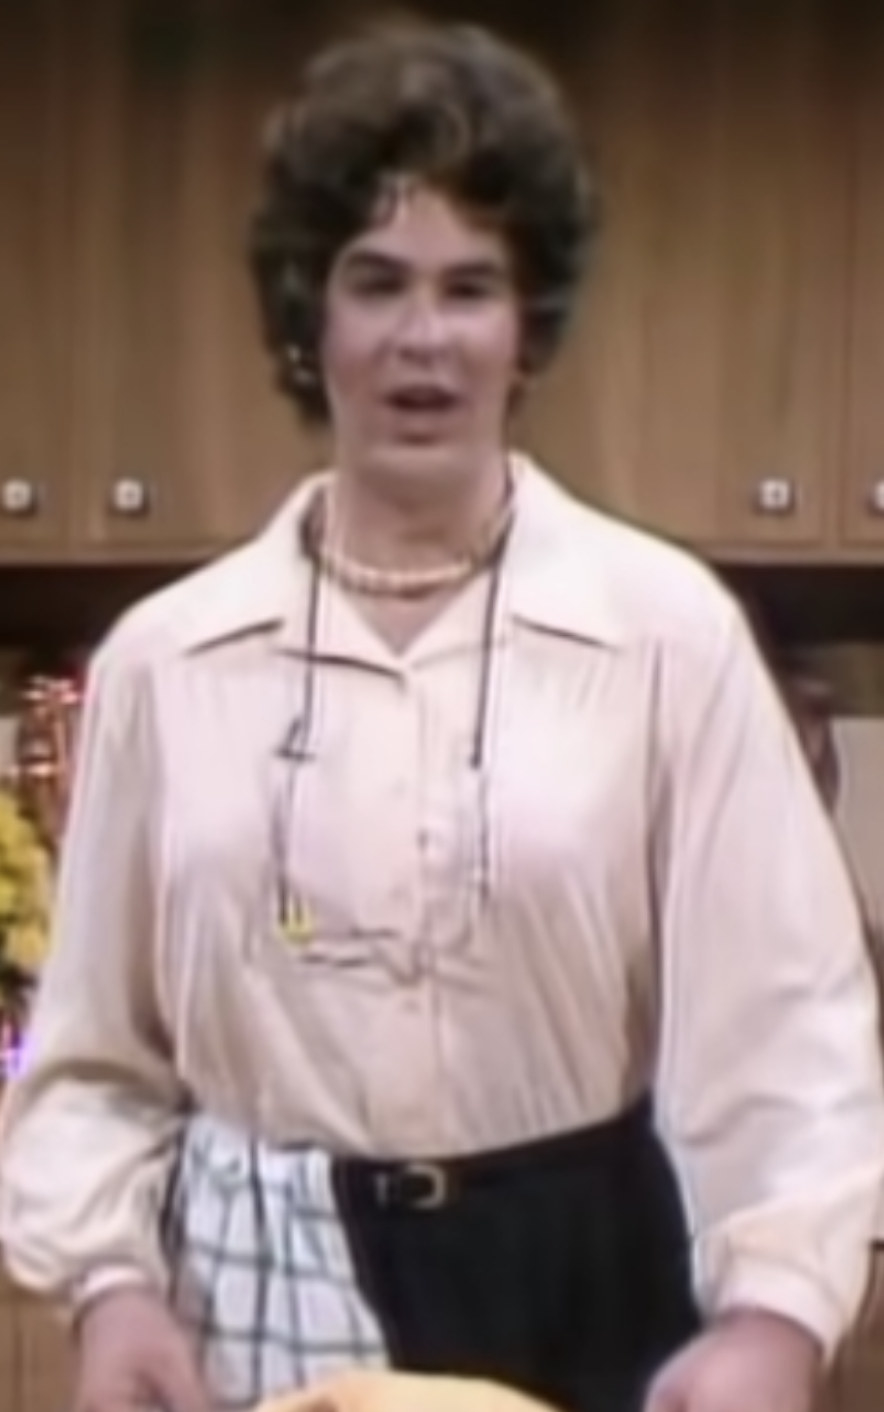 Aykroyd wearing a Julia Child-like hairdo and outfit